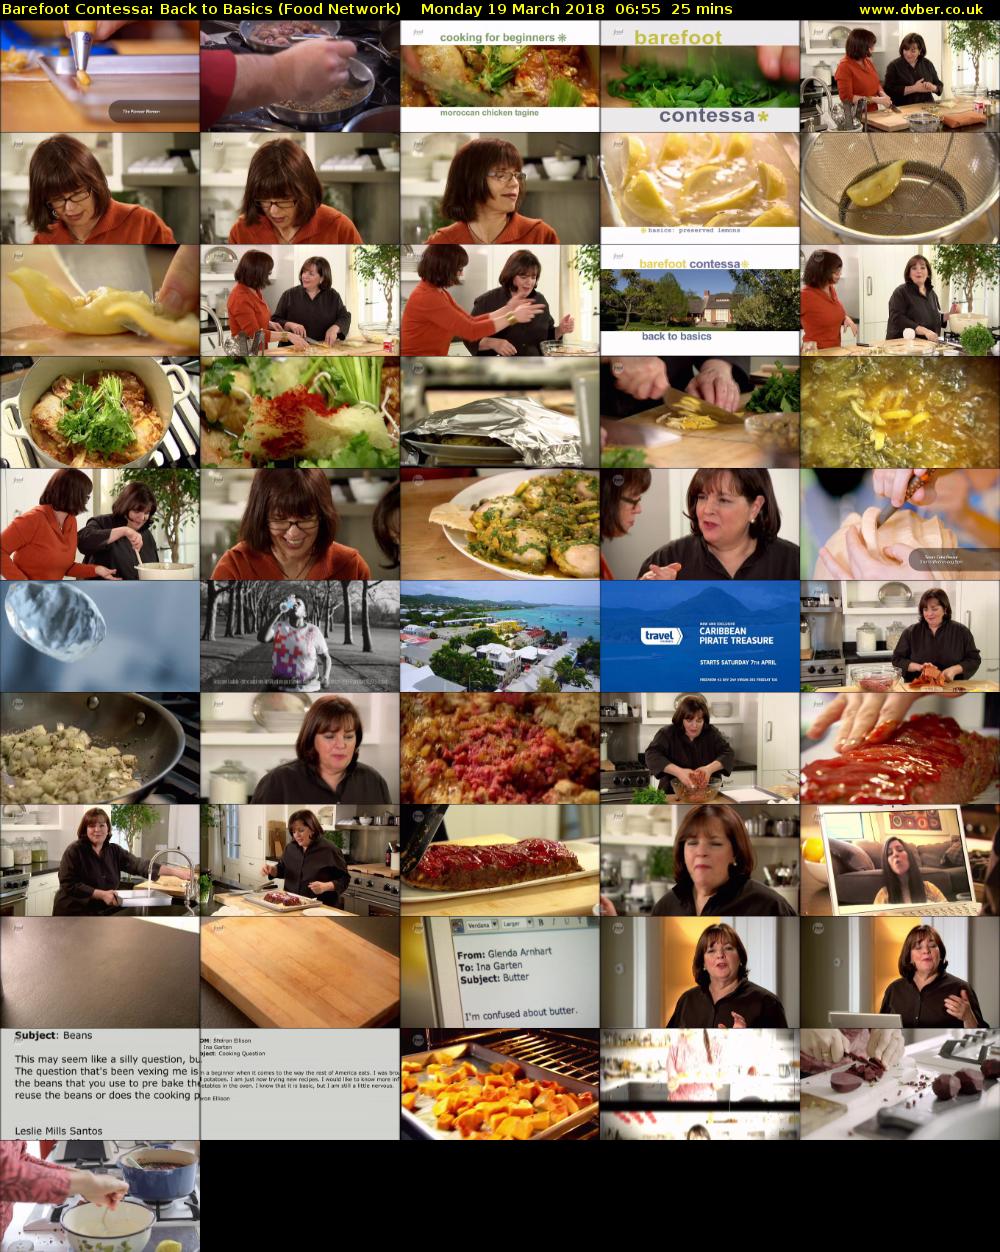 Barefoot Contessa: Back to Basics (Food Network) Monday 19 March 2018 06:55 - 07:20